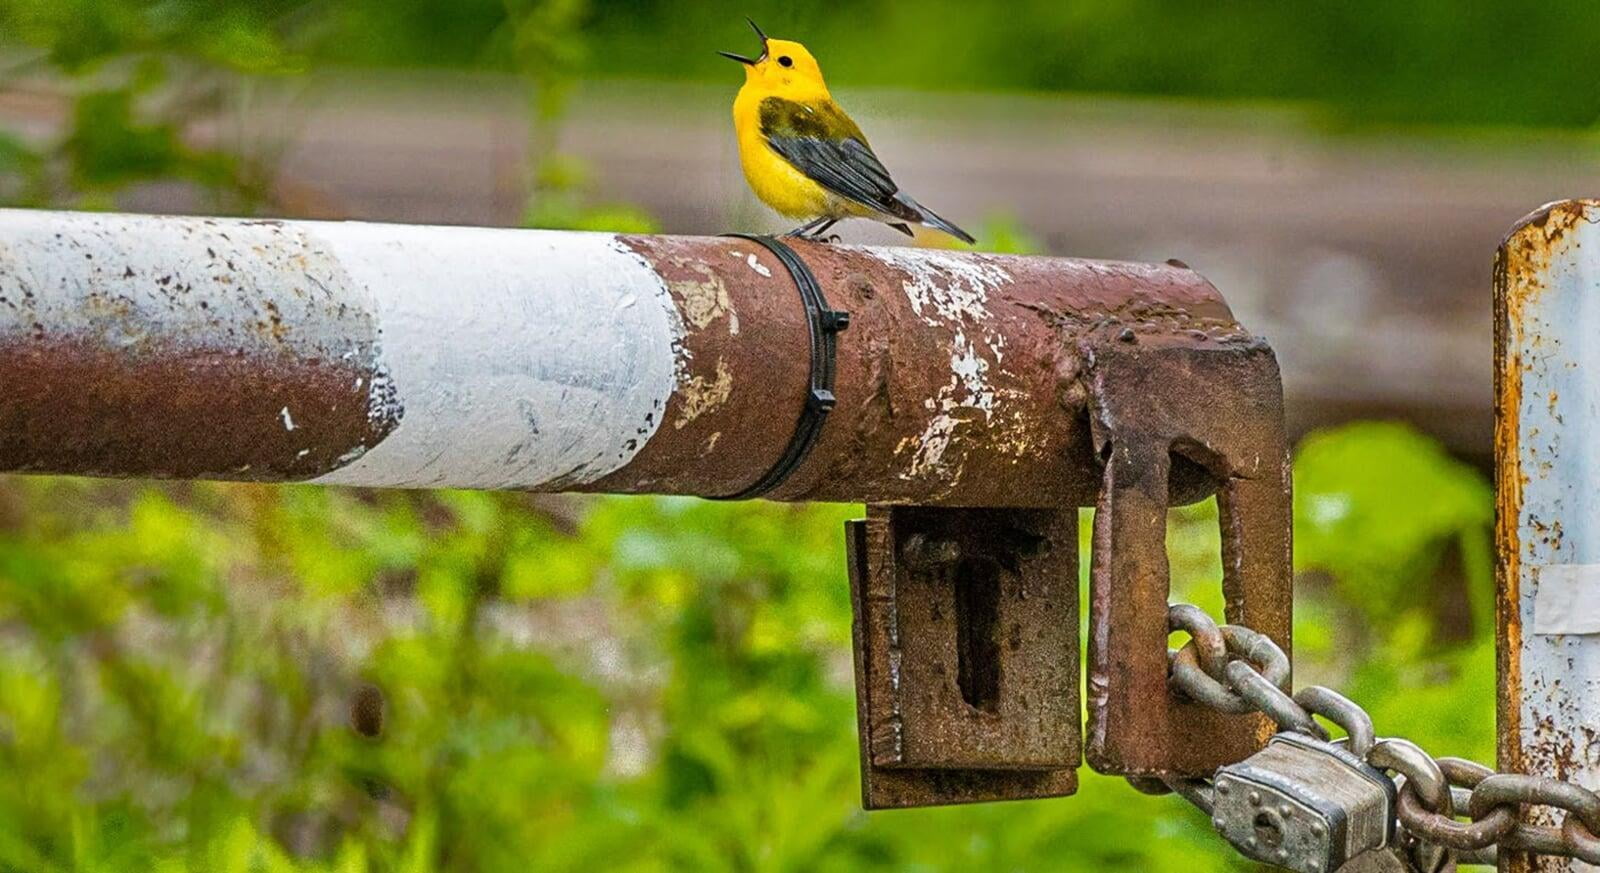 Protonotary Warbler singing while perched on a long iron gate